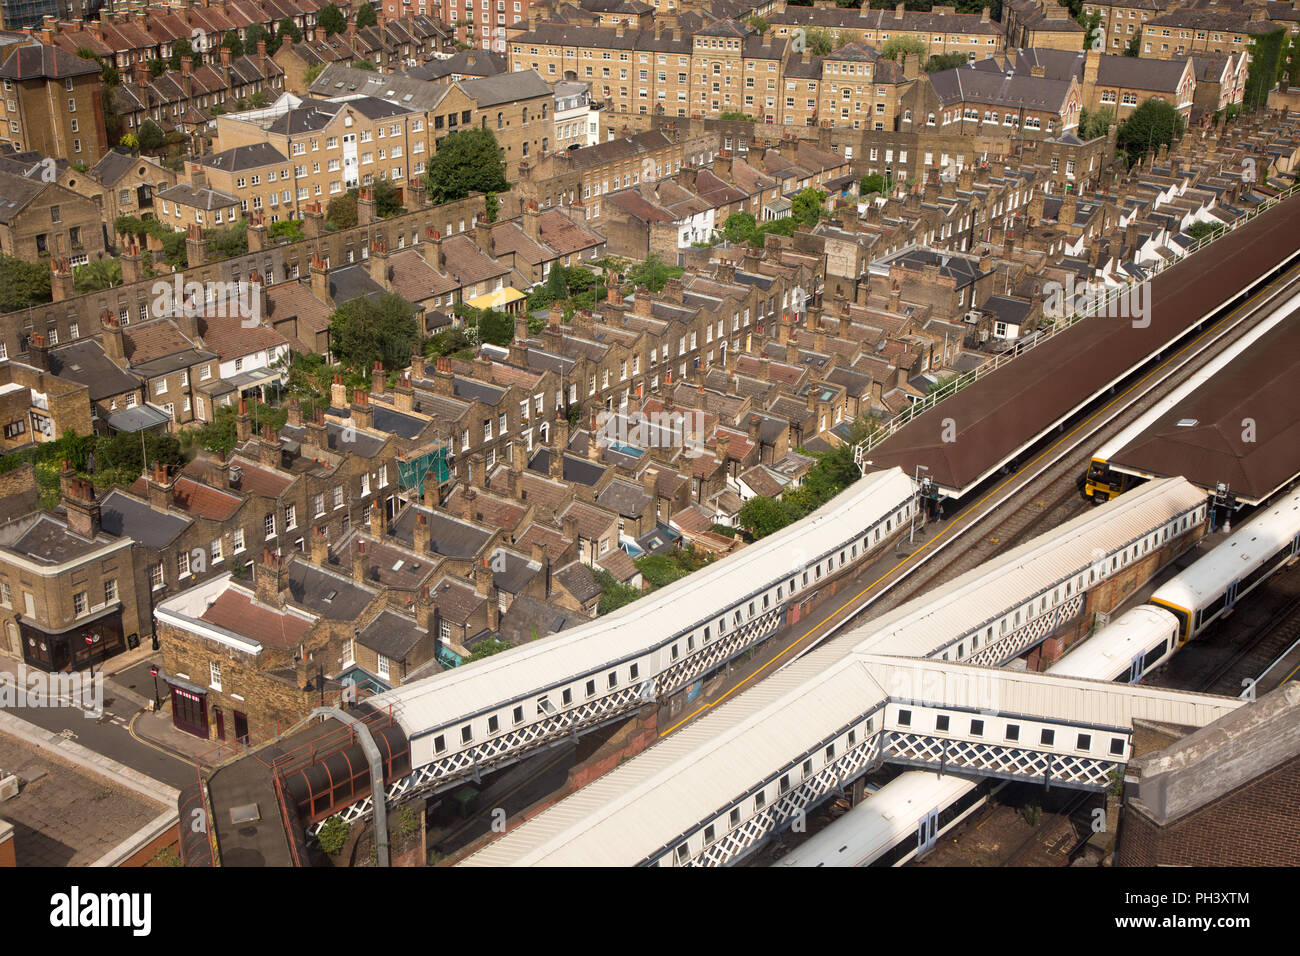 Rows of densely populated housing in Waterloo, Central London. Waterloo Station is in the foreground. Stock Photo